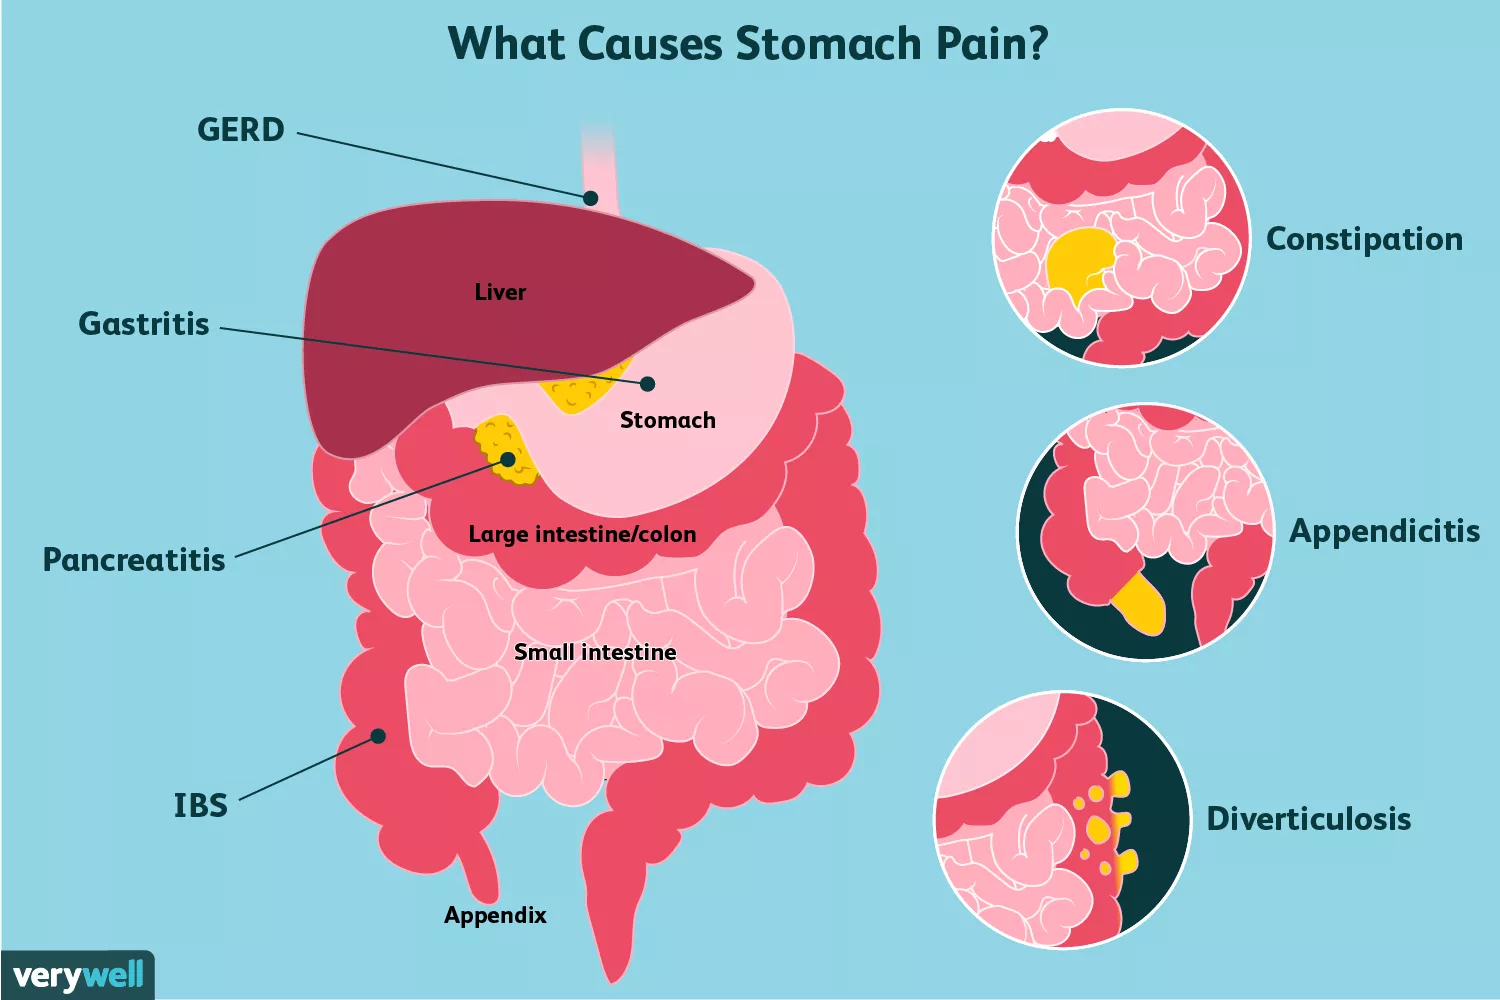 Causes of Stomach Pain and Treatment Options